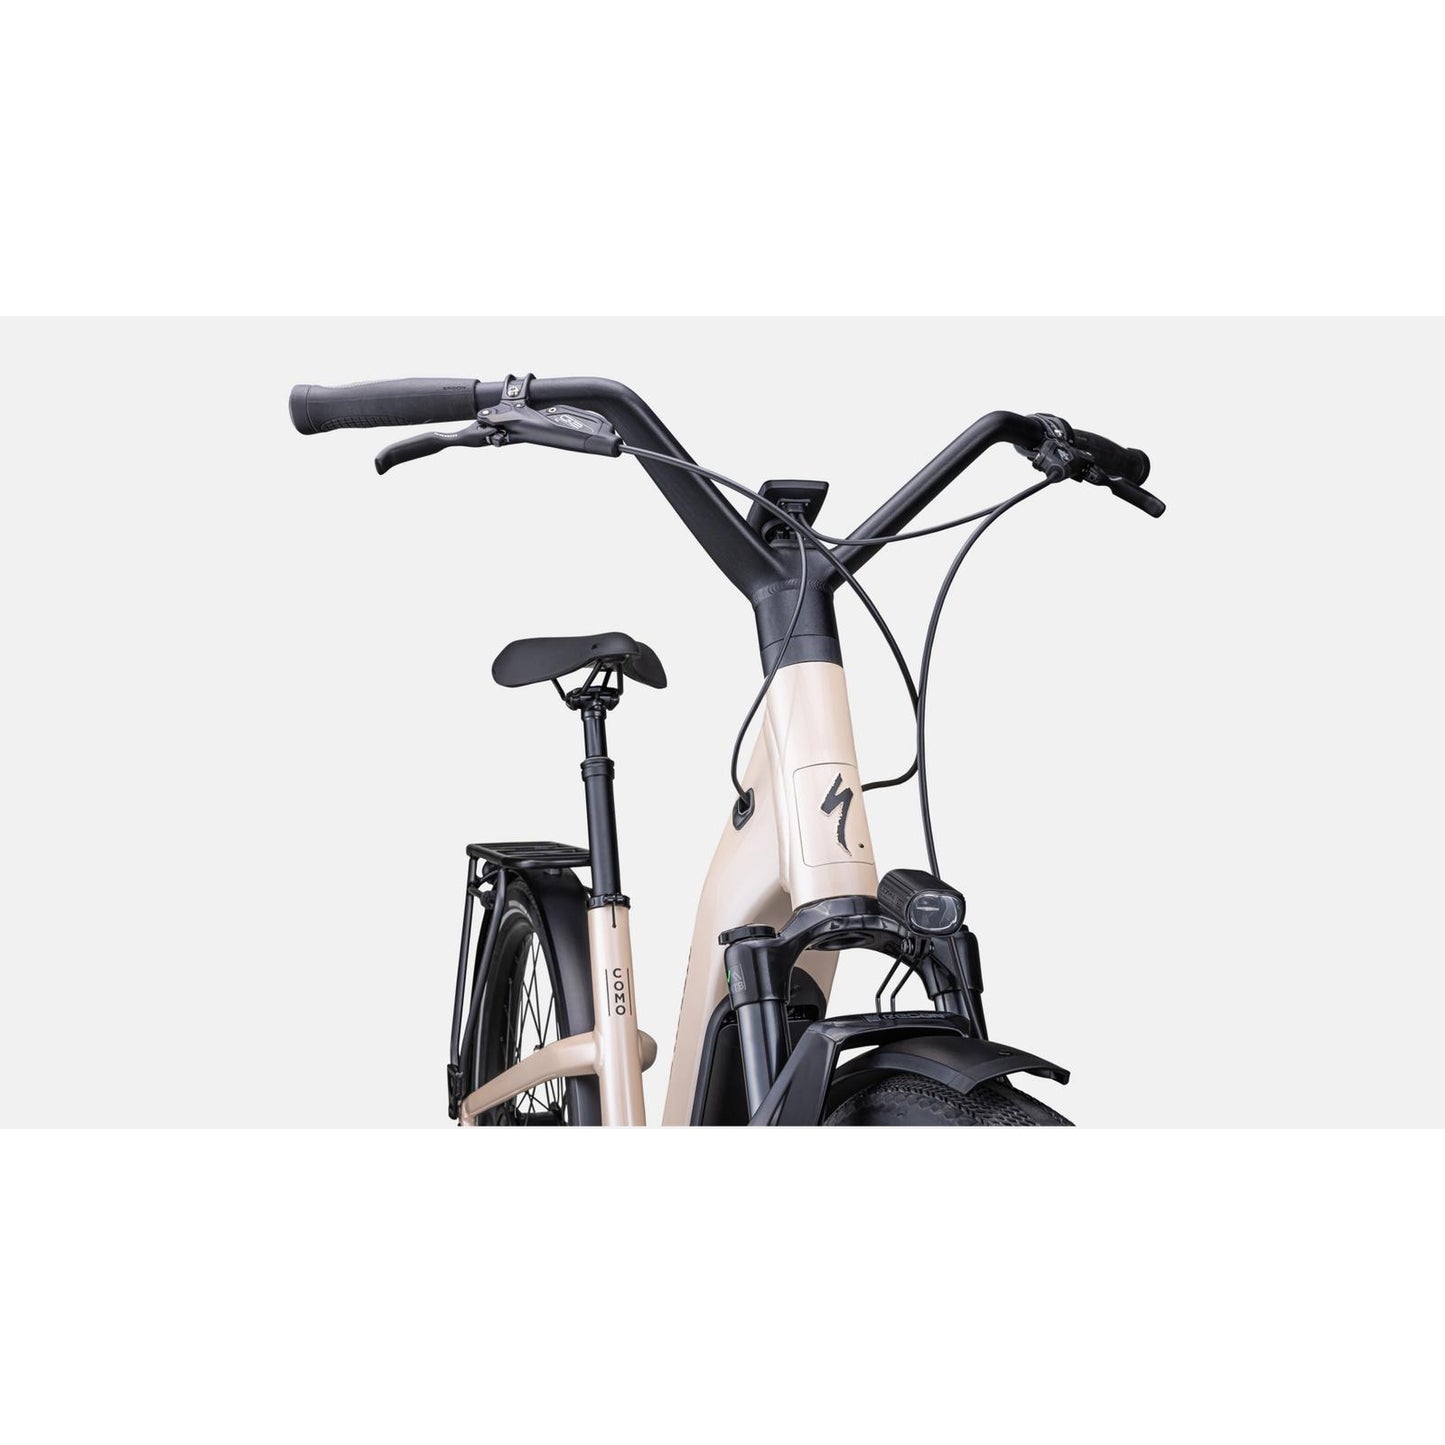 Specialized Turbo Como 5.0 IGH Active Electric Bike - Bikes - Bicycle Warehouse